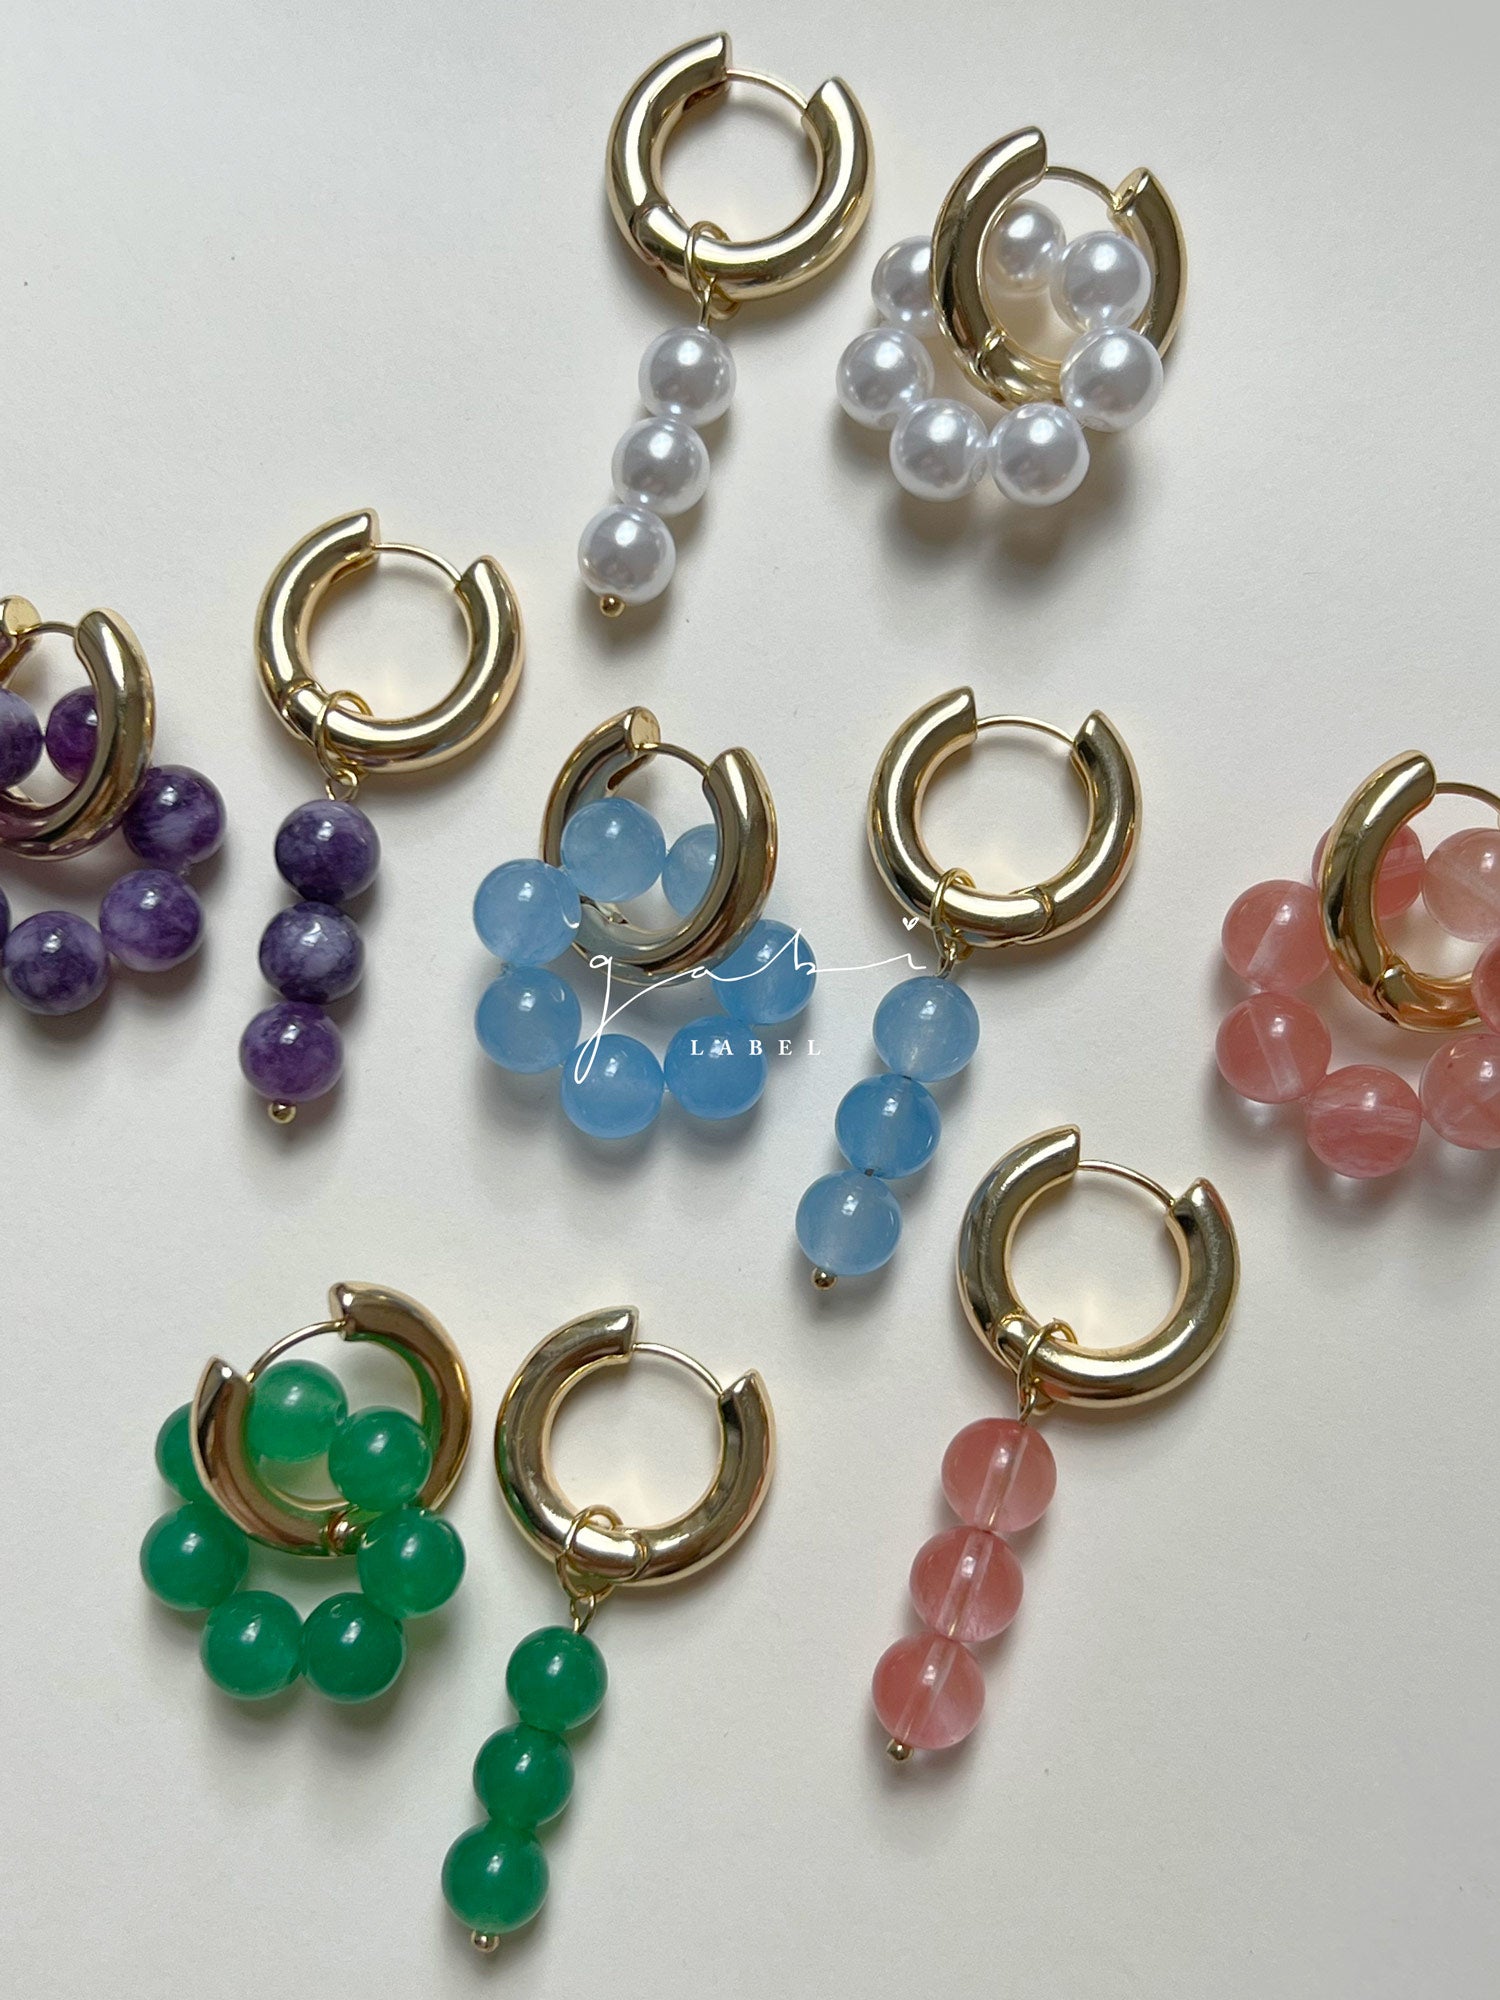 Asymmetrical Hoops with Natural Stones - Pink